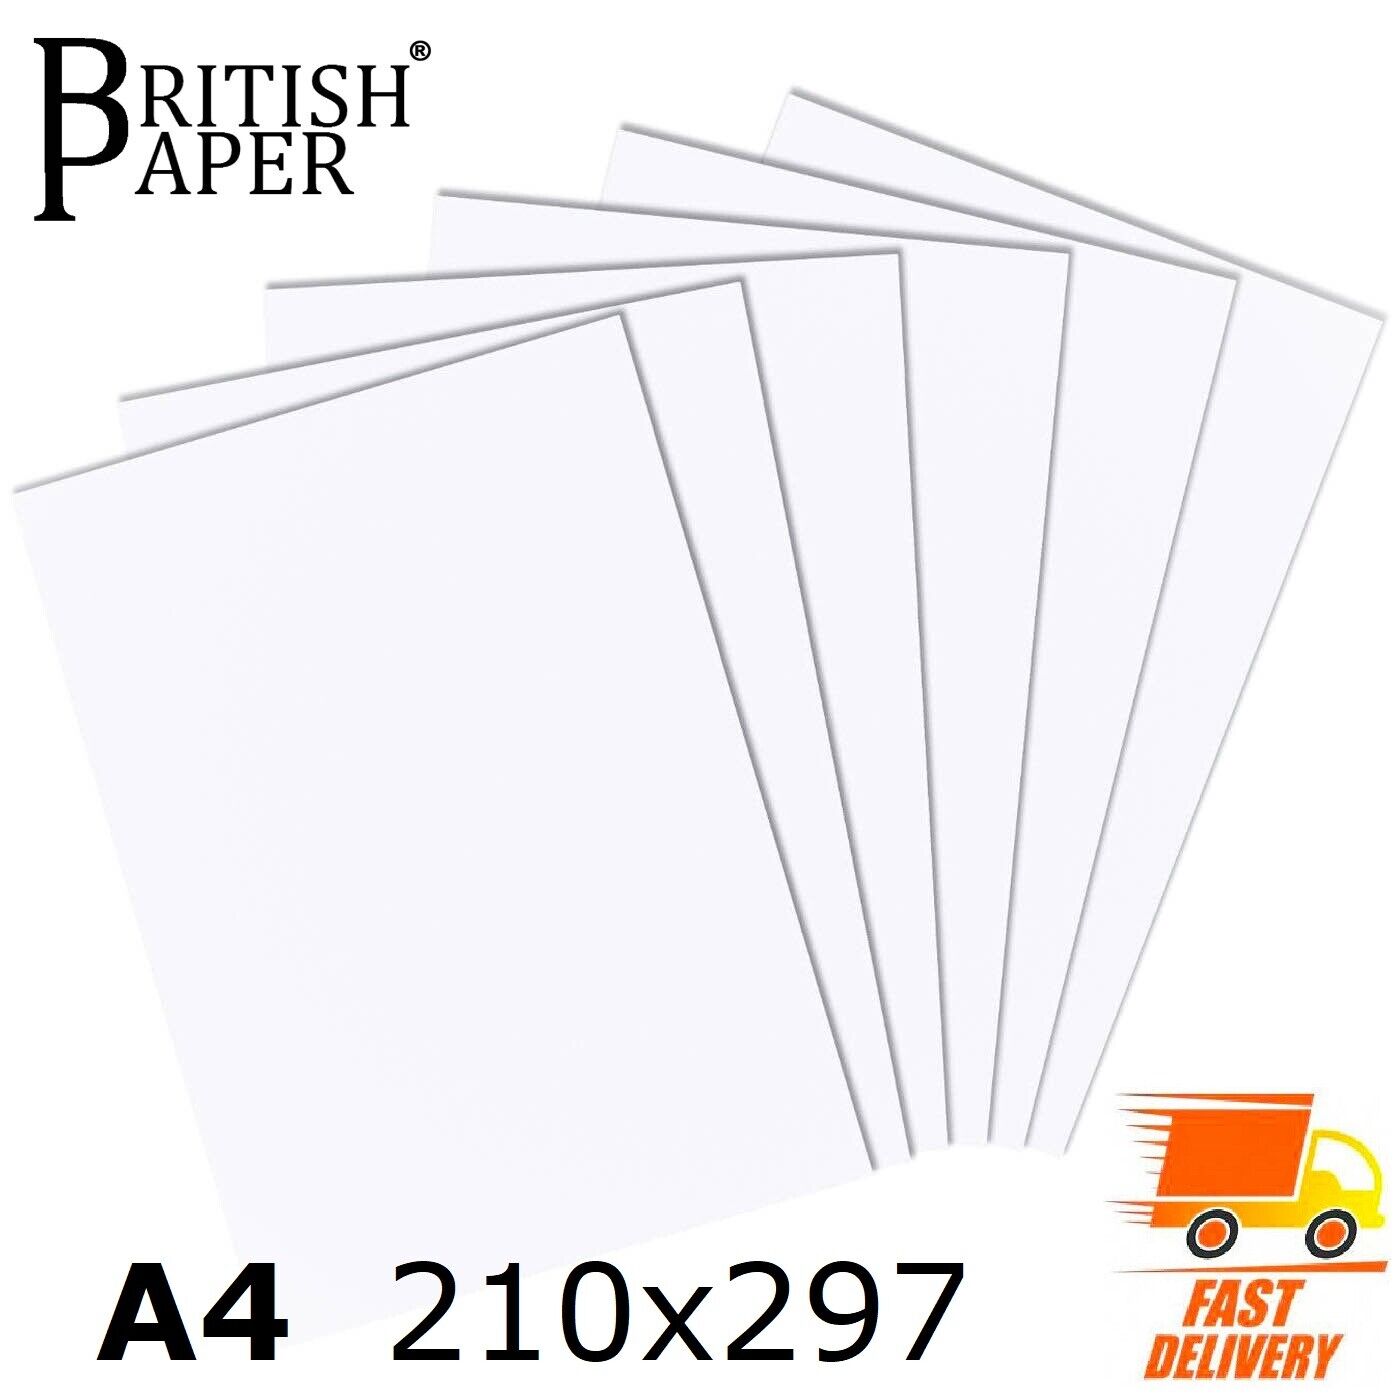 WHITE THICK THIN CARD MAKING A6 A5 A4 A3 A2 PAPER SMOOTH REAM SHEET BOARD STOCK Popularna niska cena